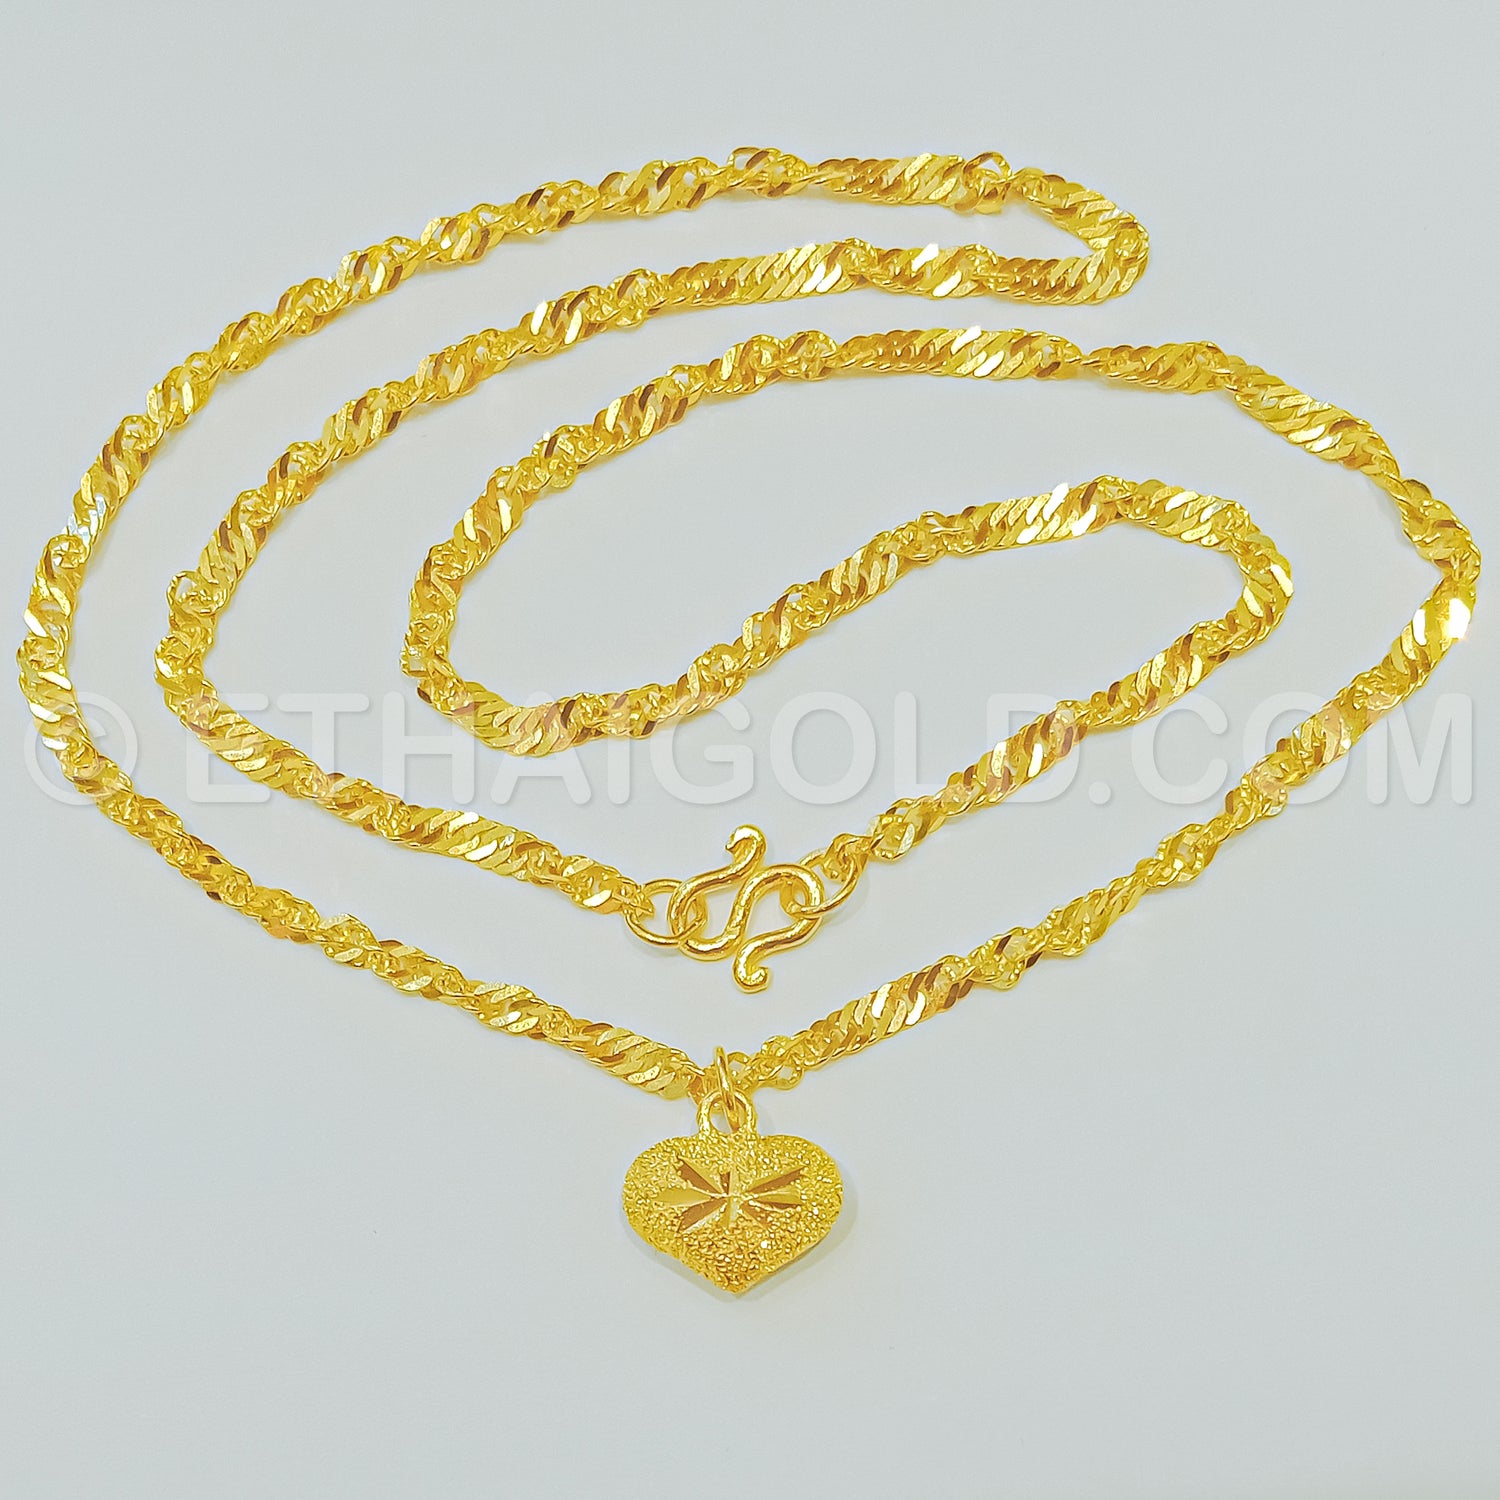 1/4 Baht Gold Chains